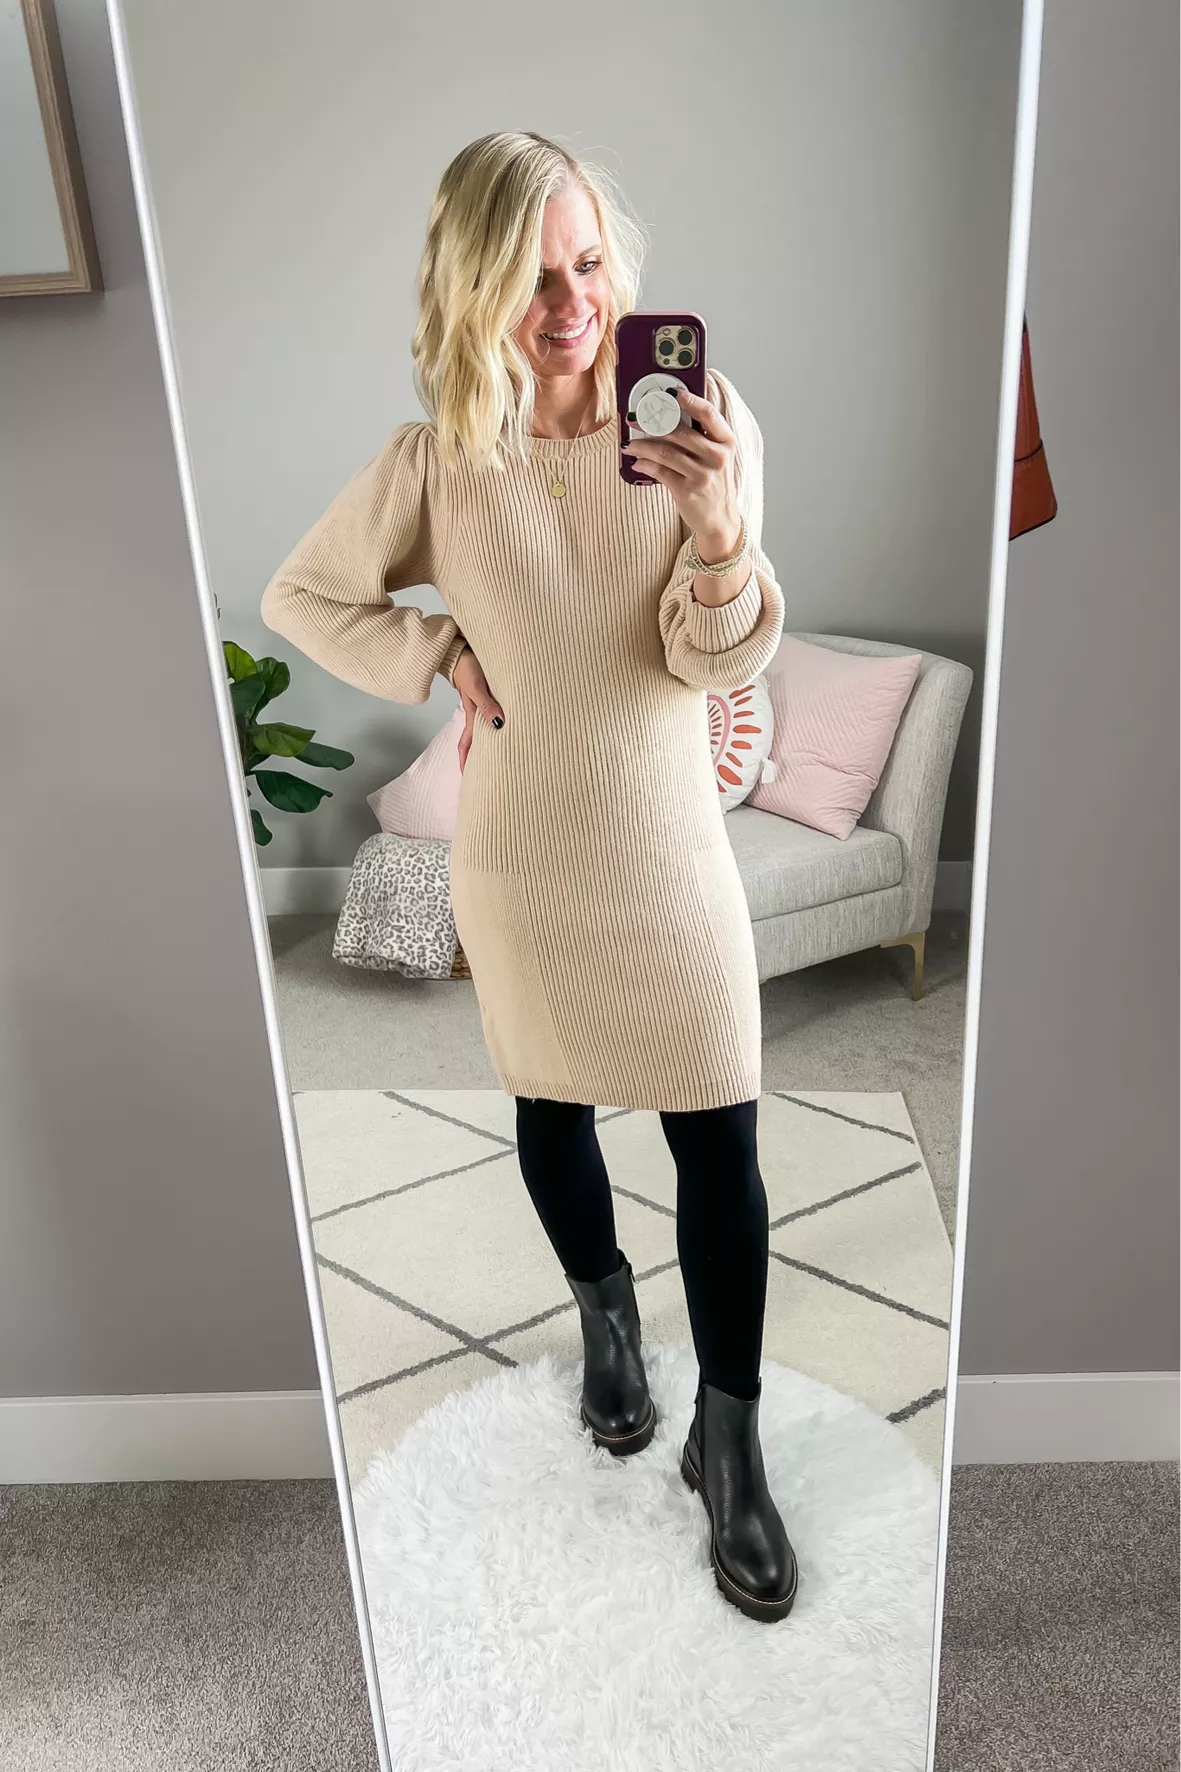 Shoes to Wear With Sweater Dresses - the gray details